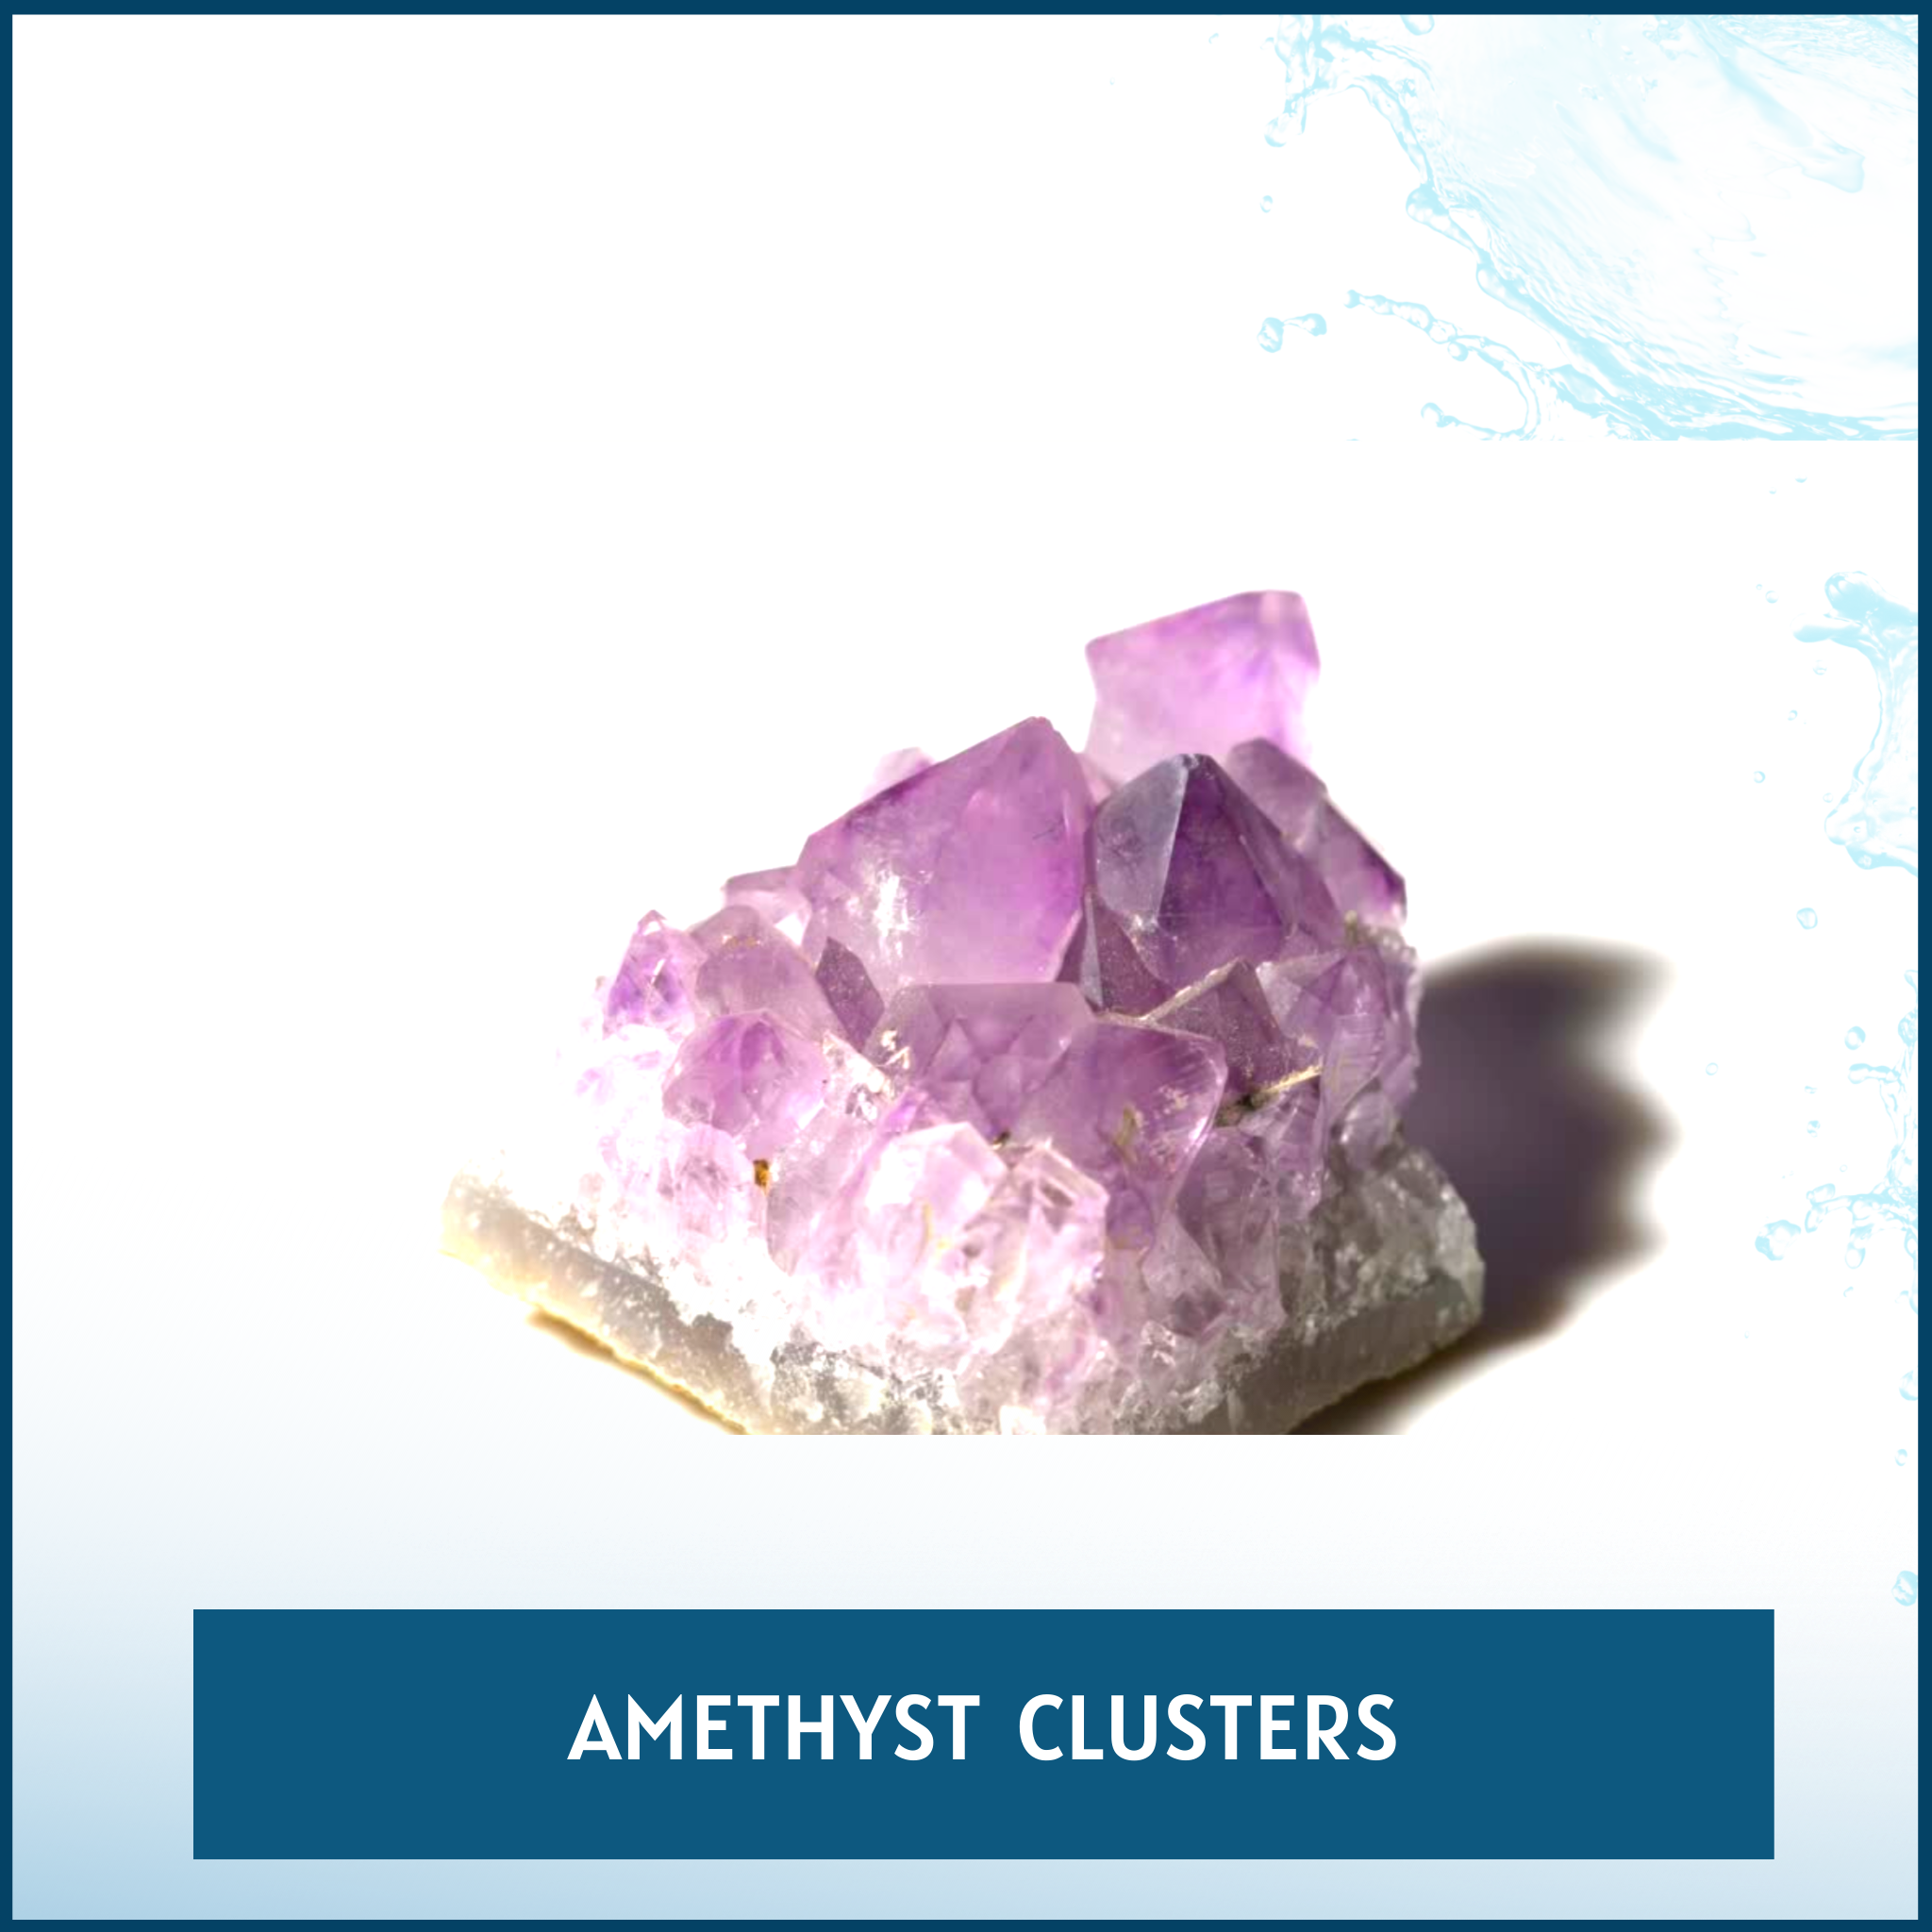 Enhance Your Space with Stunning Amethyst Clusters - Natural Healing Crystals for Positive Energy and Décor-11